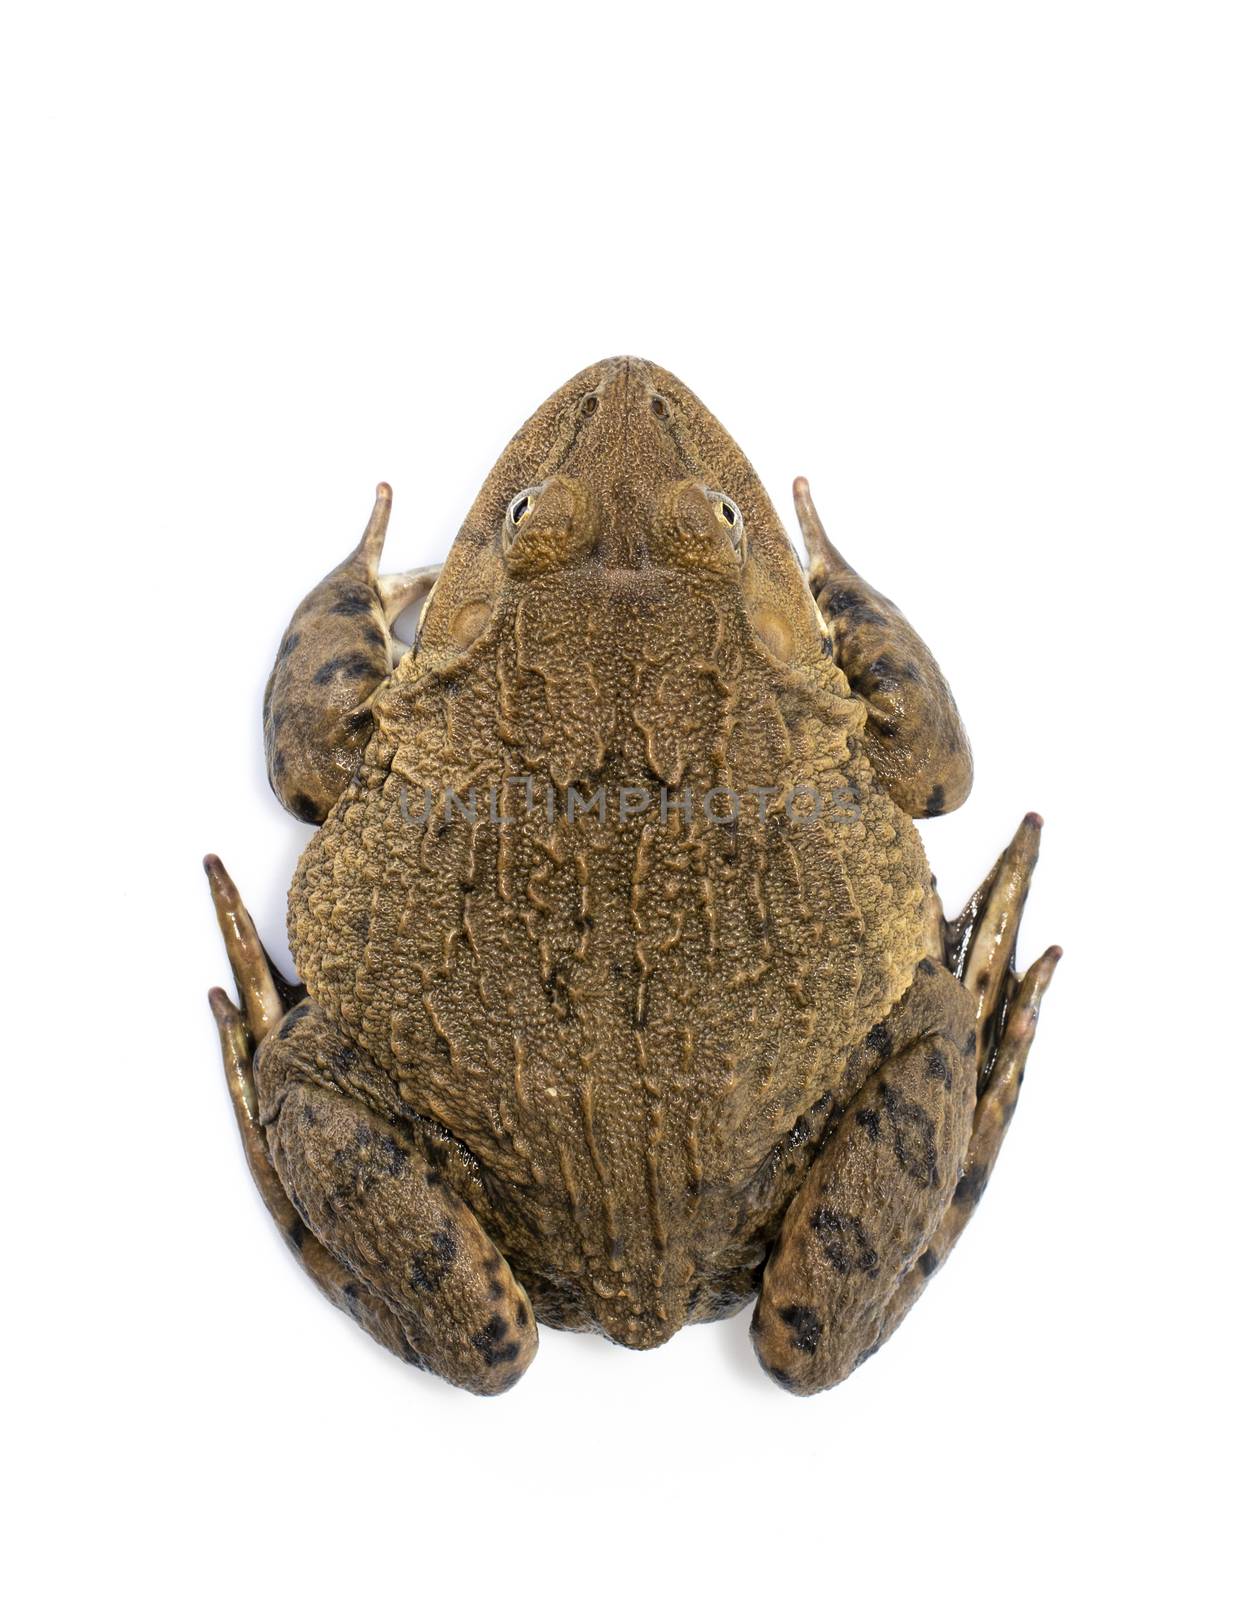 Image of Chinese edible frog, East Asian bullfrog, Taiwanese fro by yod67